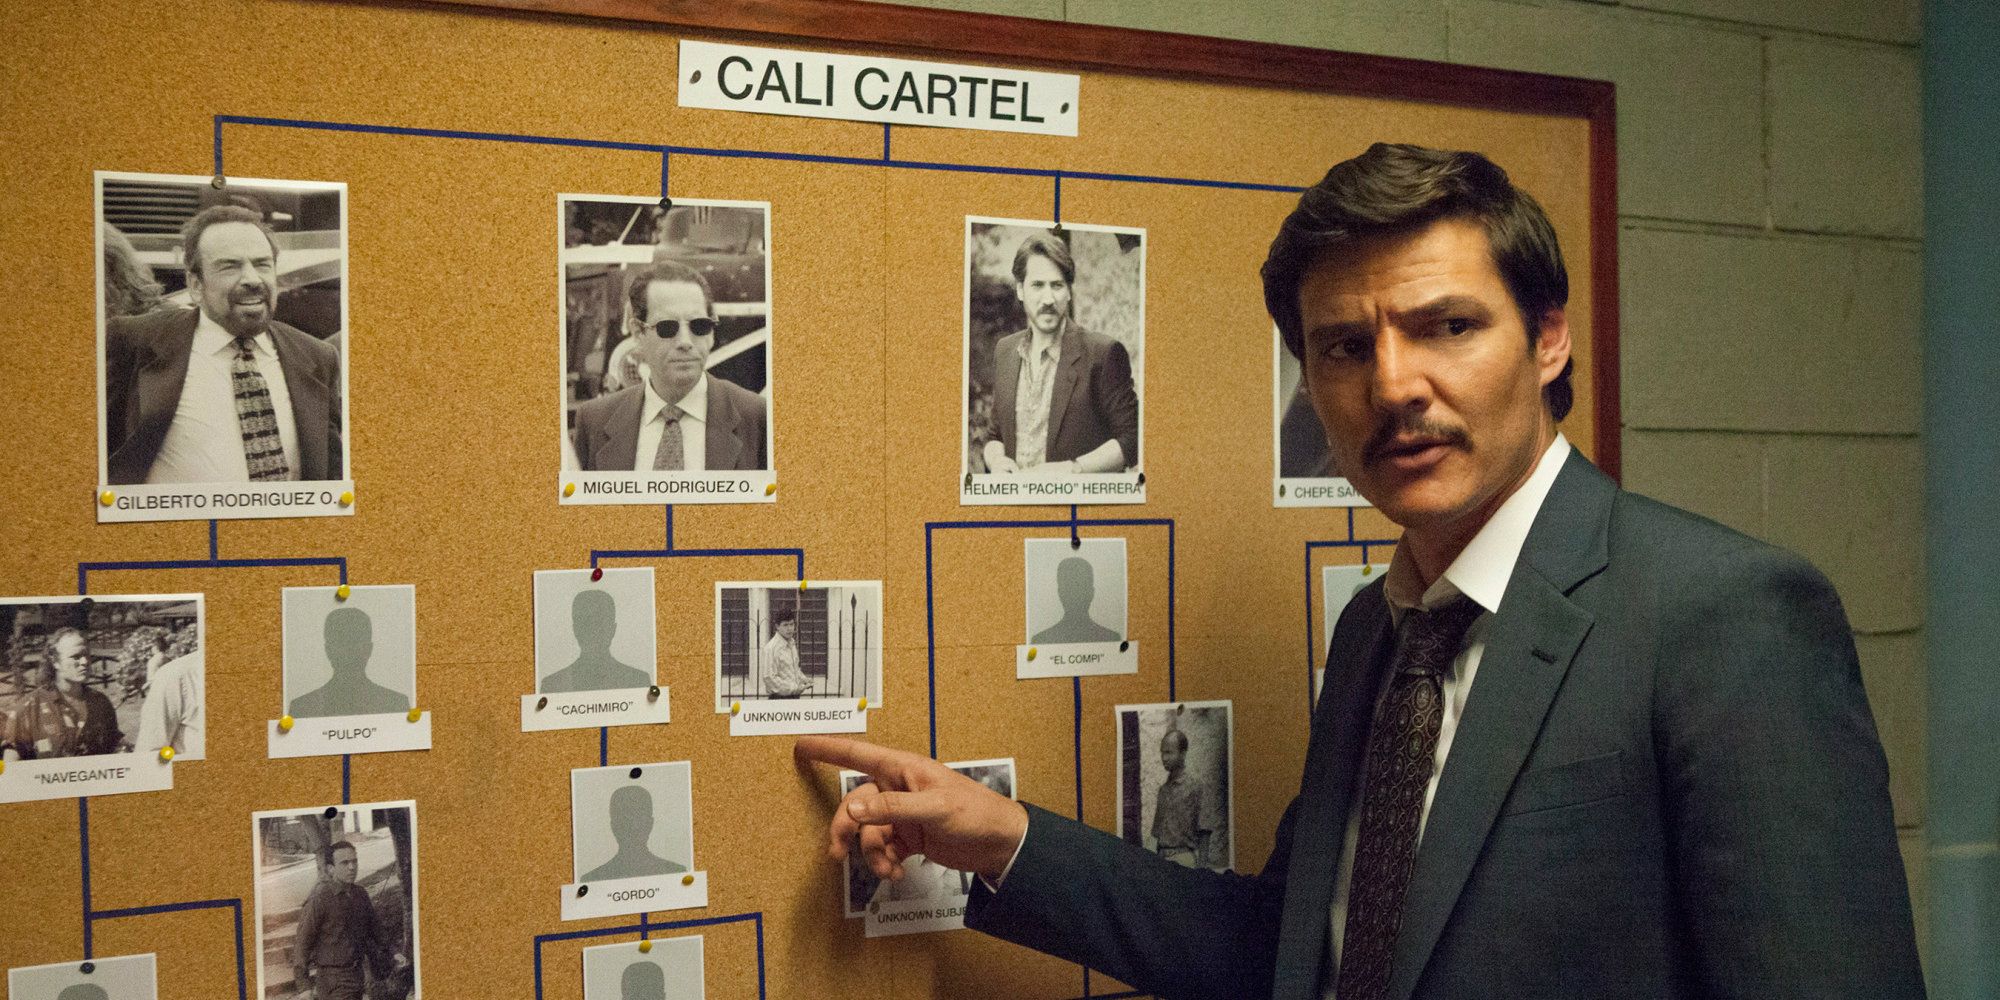 Pedro Pascal standing at a board in Narcos